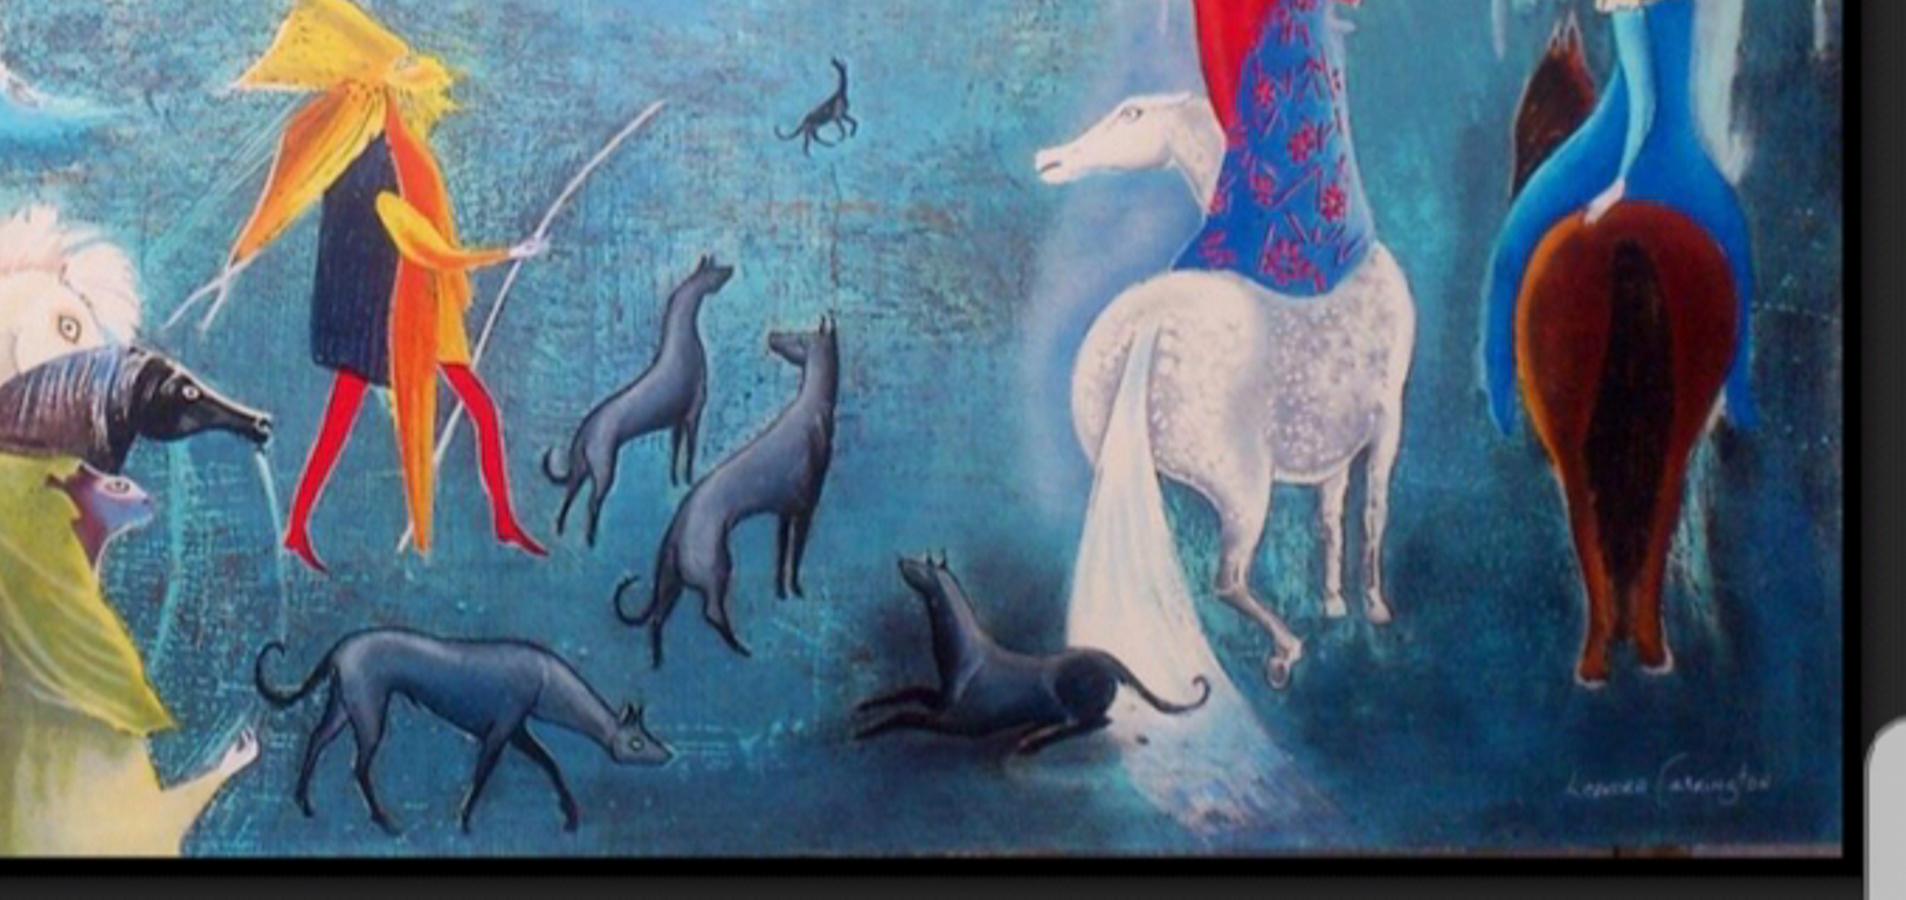 Leonora Carrington (Lancashire, England, April 6, 1917 – Mexico City, May 25, 2011) was an English surrealist painter and writer naturalized Mexican.

In the eighties Carrington began to cast sculptures in bronze, his themes referring to the